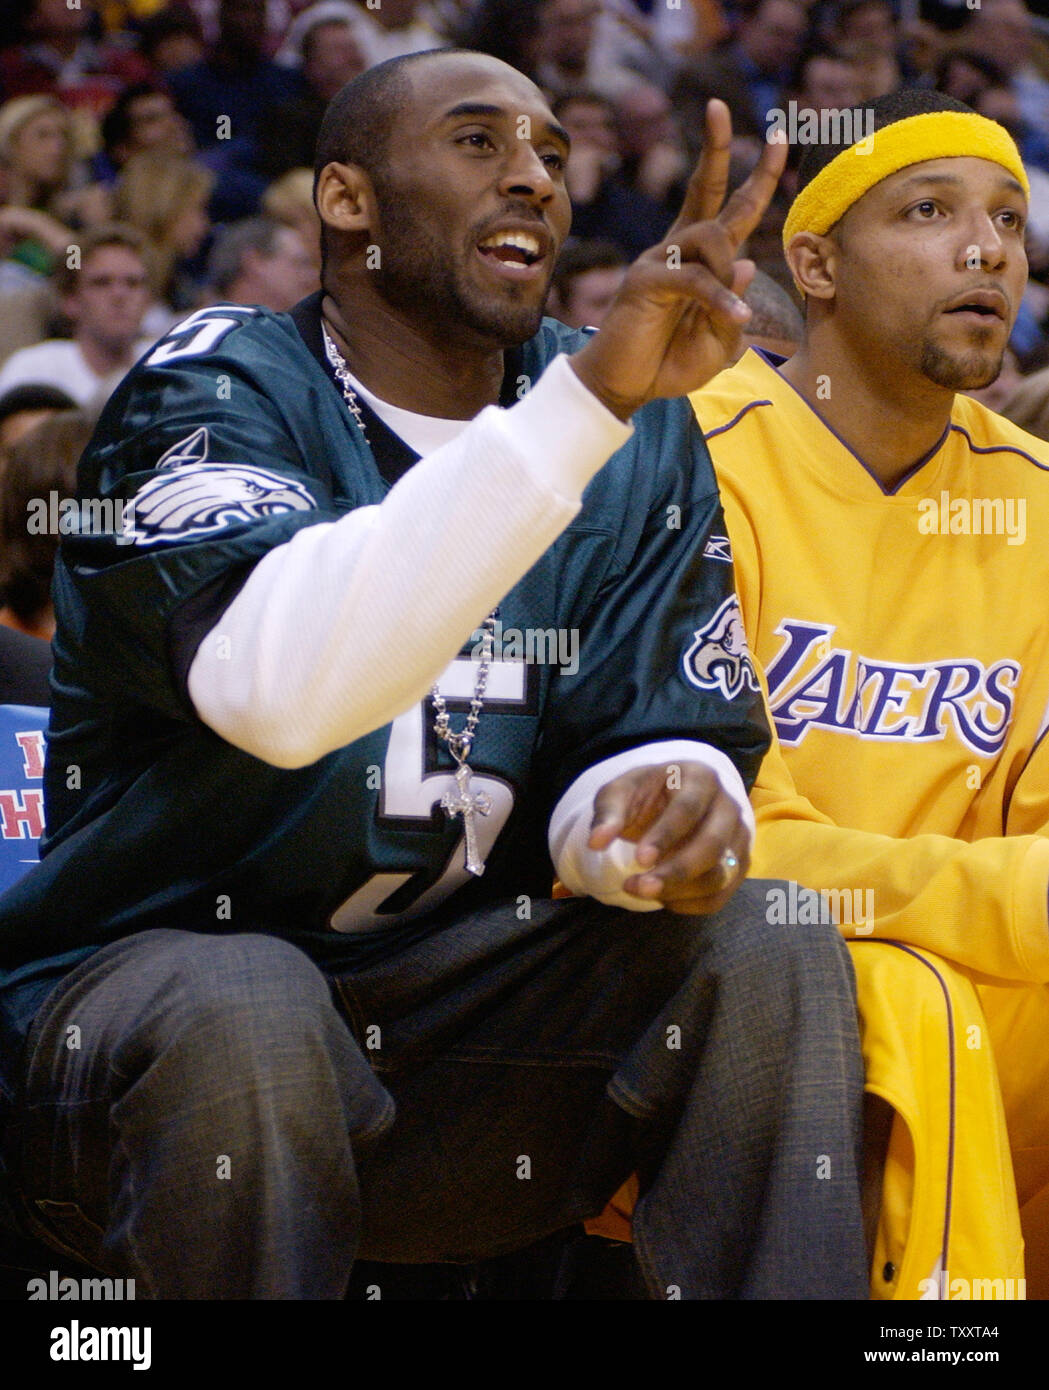 Los Angeles Lakers' Kobe Bryant, wearing a Philadelphia Eagles Donavan McNabb football jersey, reacts to a referee's call during fourth quarter action against the San Antonio Spurs, February 3, 2005, at Staples Center in Los Angeles. Bryant, whose hometown is Philadelphia is sidelined with a severely sprained right ankle and is not expected to return until after the All-Star break at the earliest.  (UPI Photo/Jim Ruymen) Stock Photo